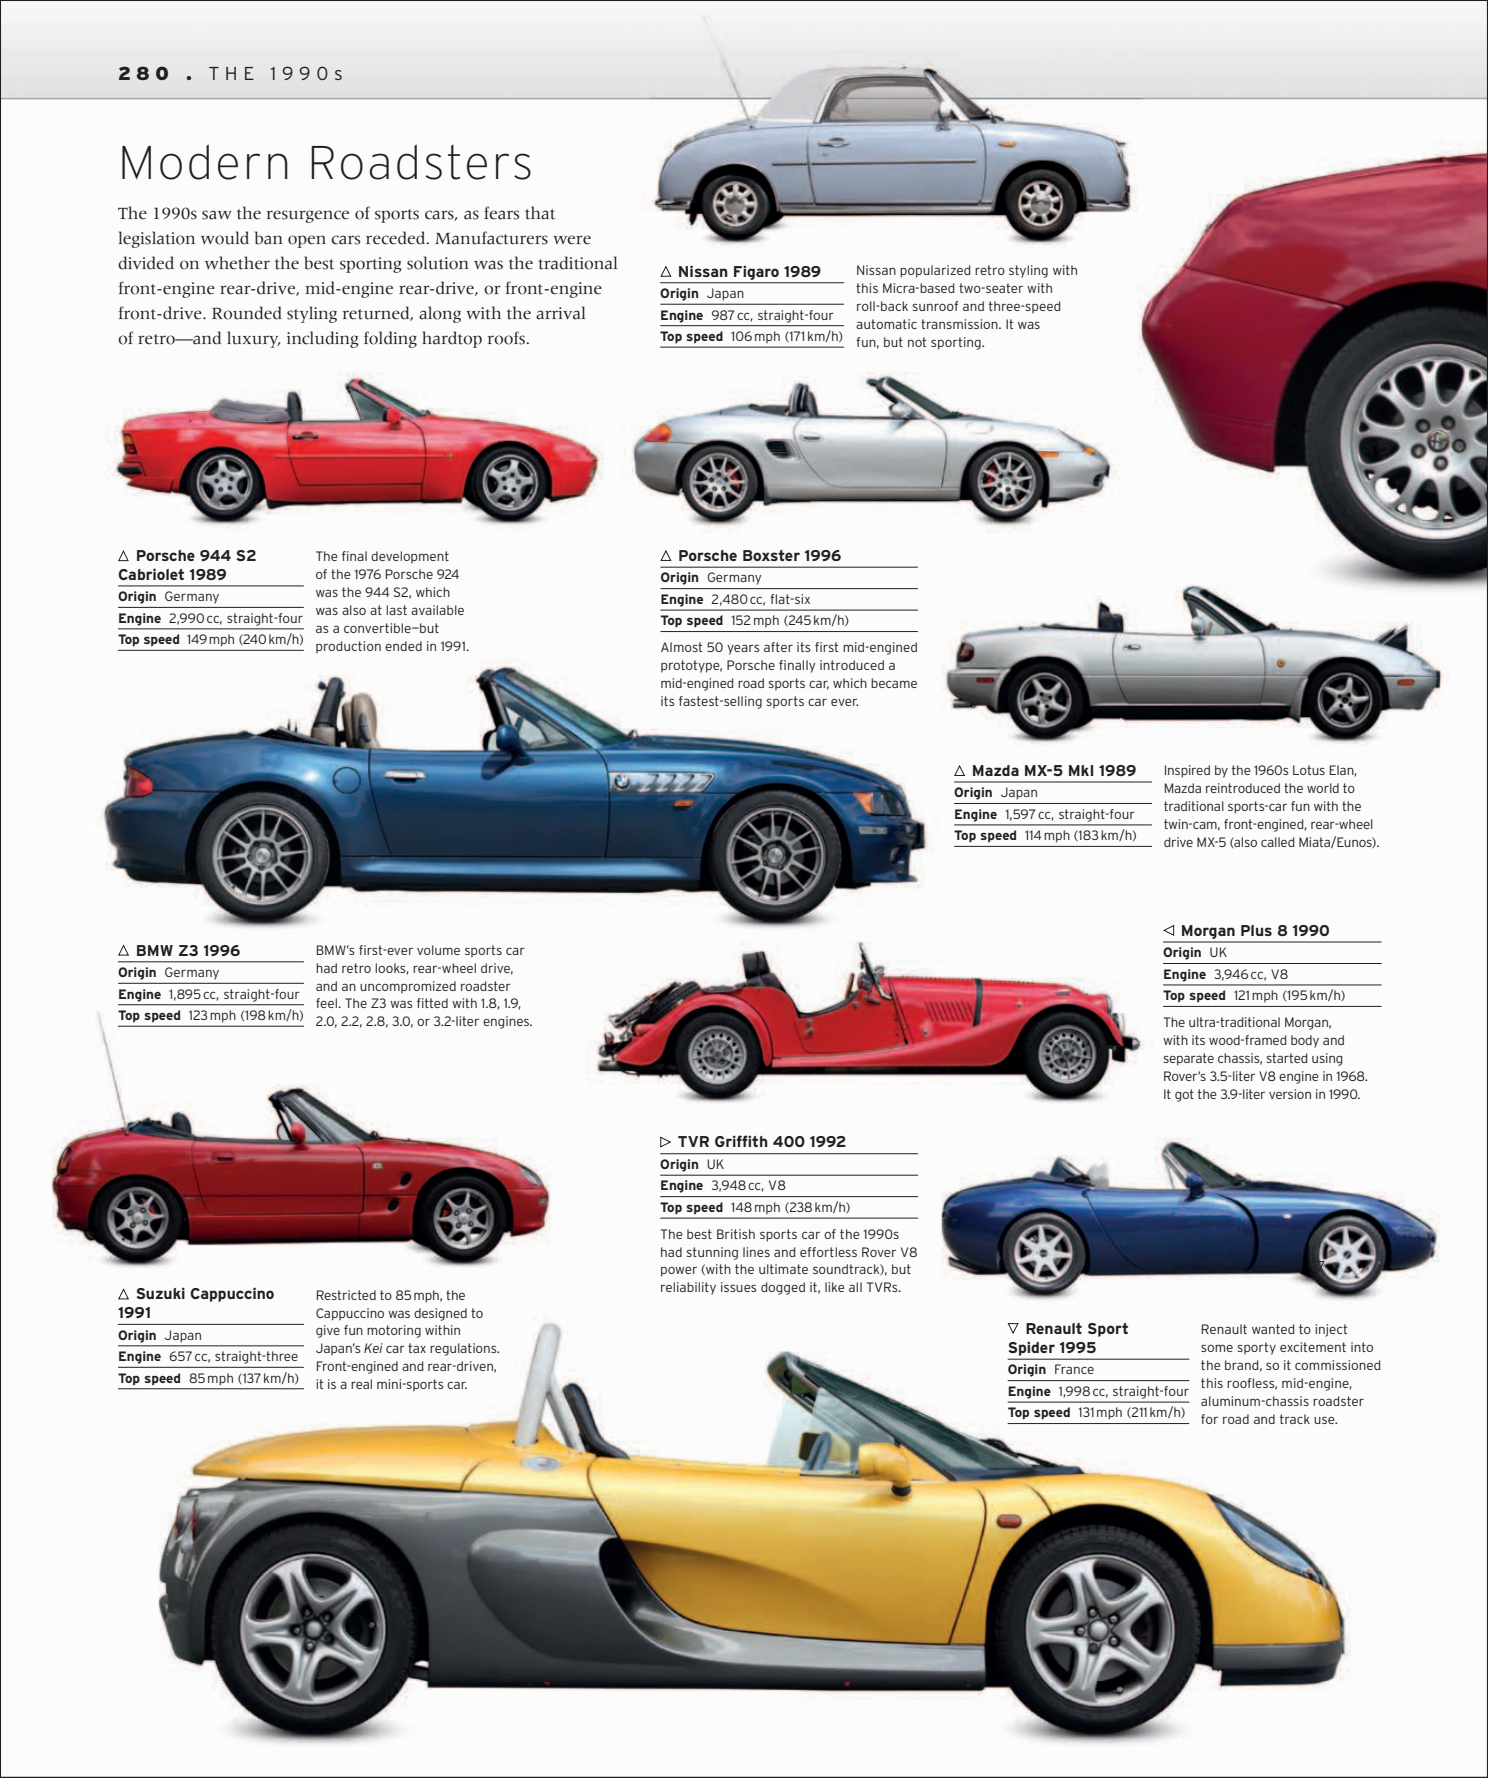 Car%20-%20The%20Definitive%20Visual%20History%20of%20the%20Automobile_282.png